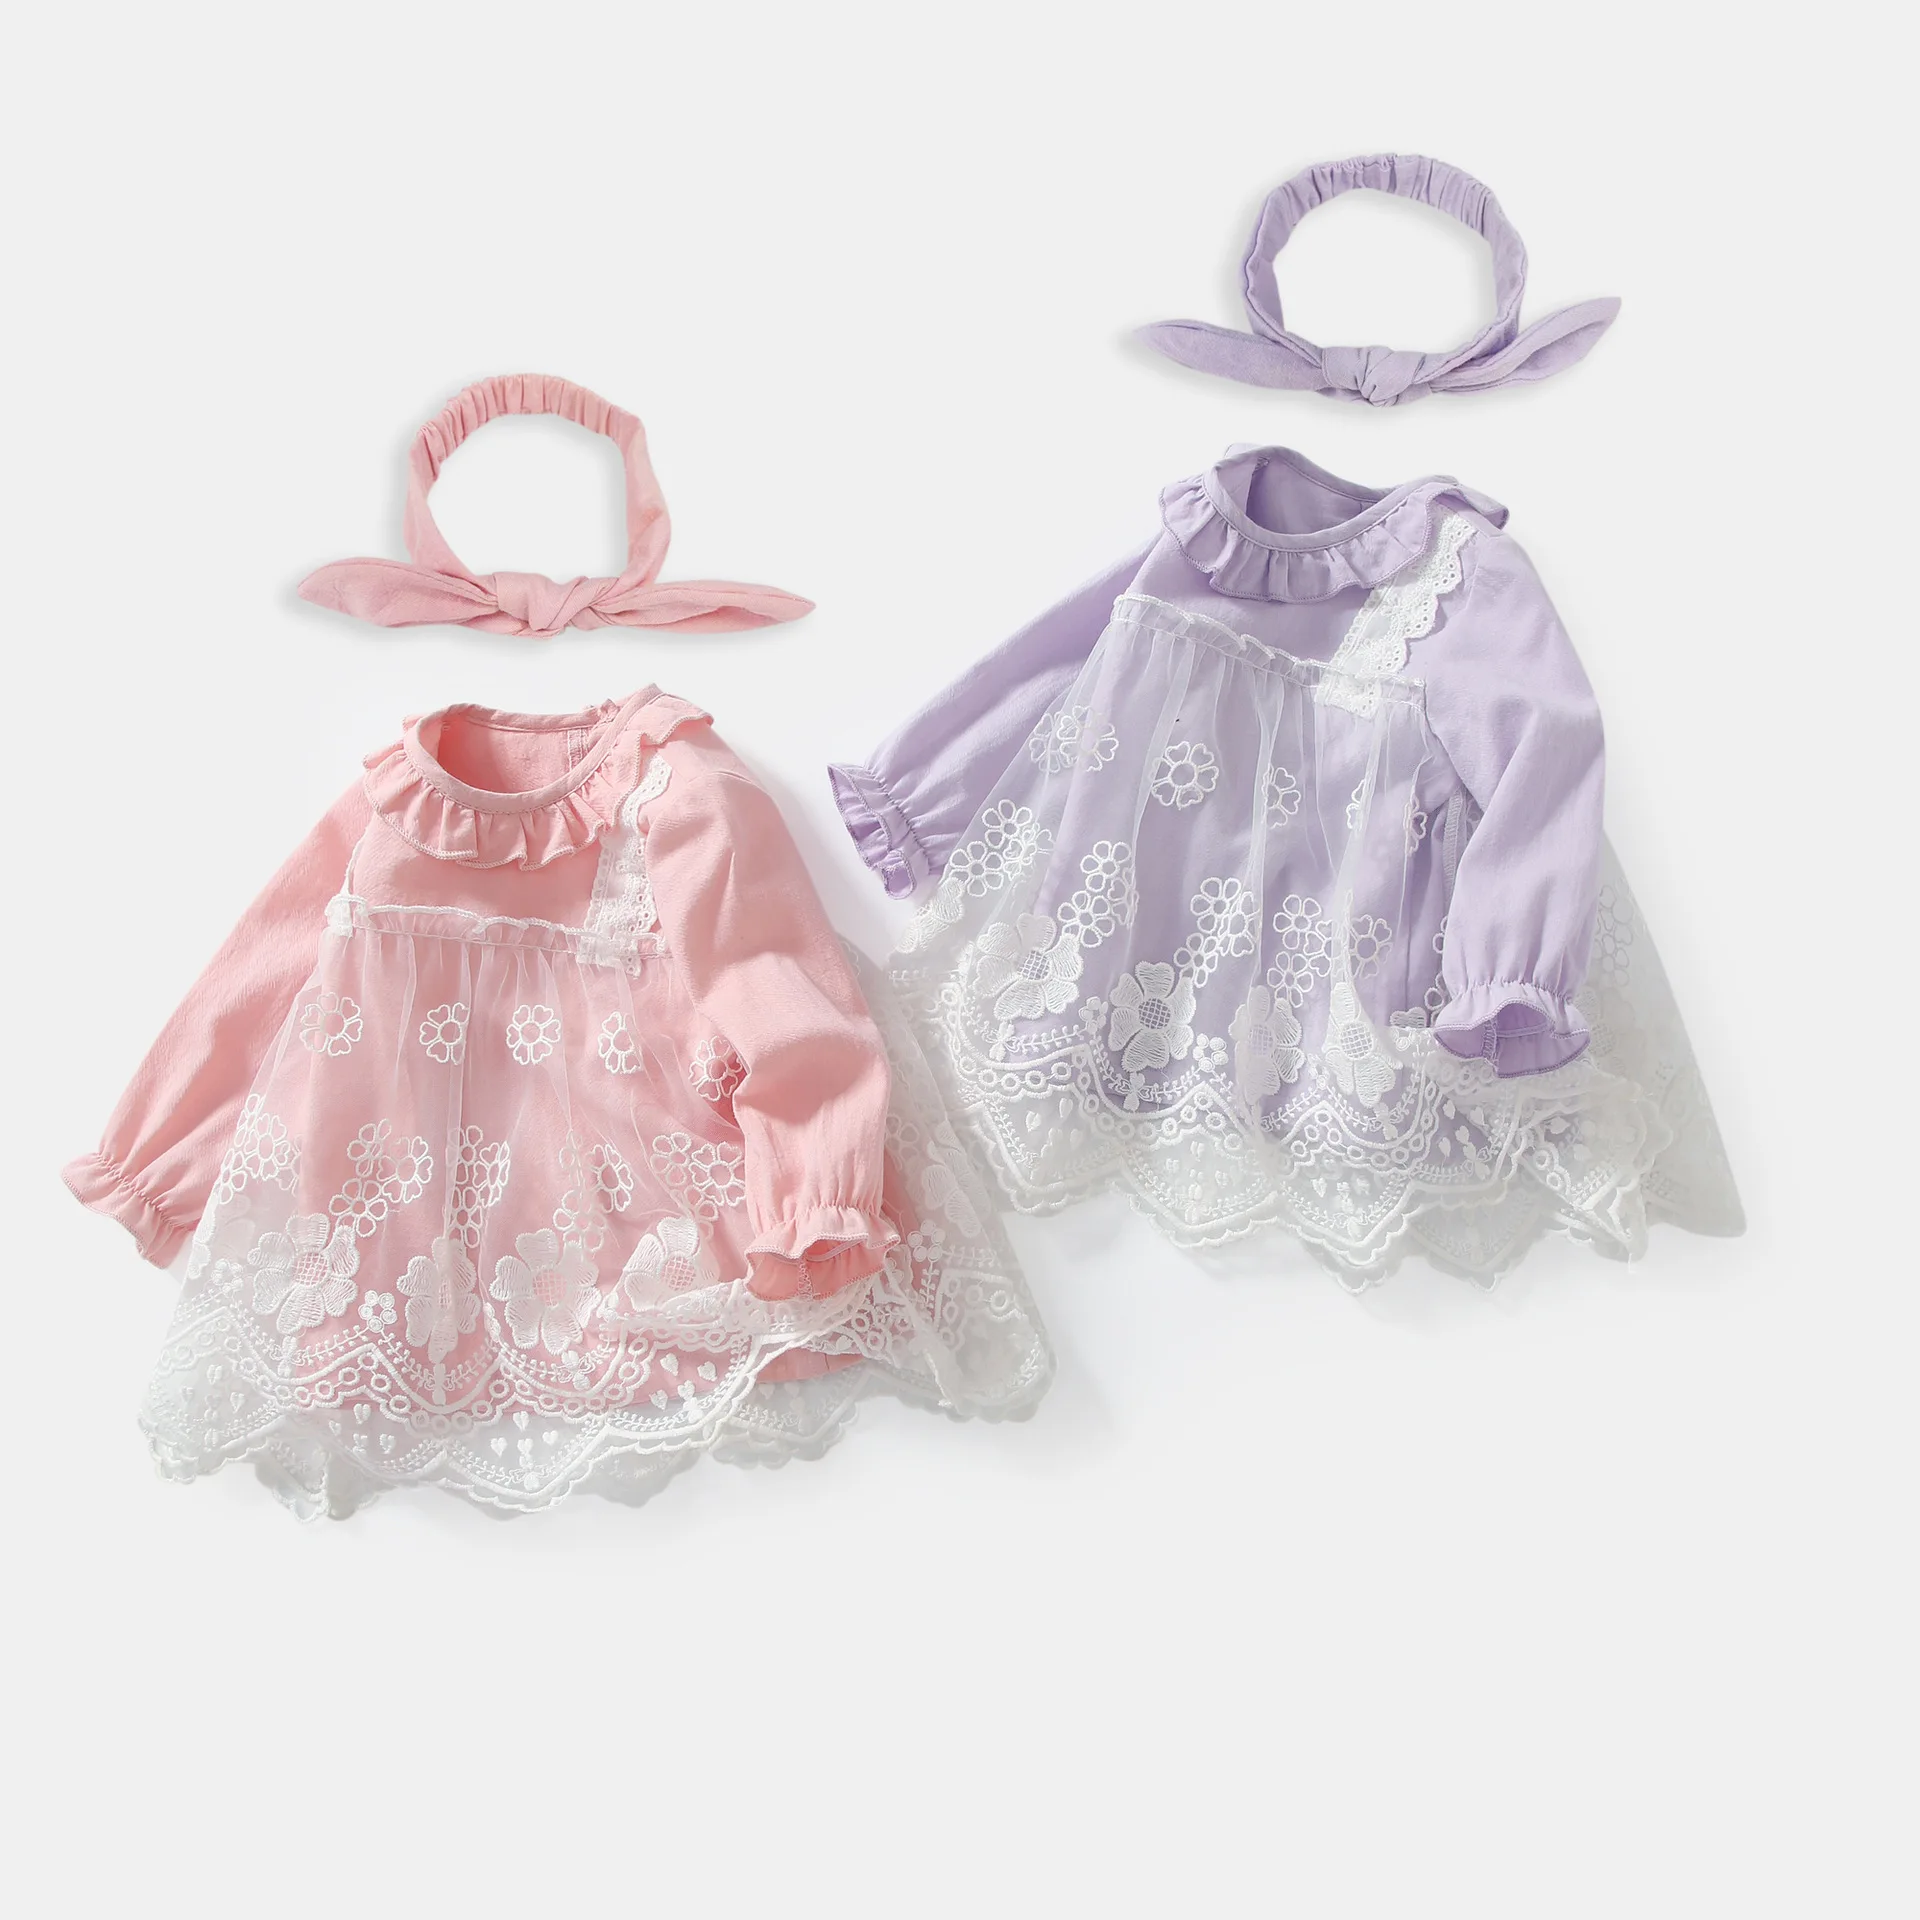 

Twin Baby Girls Dress Party And Wedding Clothes For Babies 2Pcs Pink Lace Dresses Long Sleeve Spring 0-4Y Kids Girl Set Headband